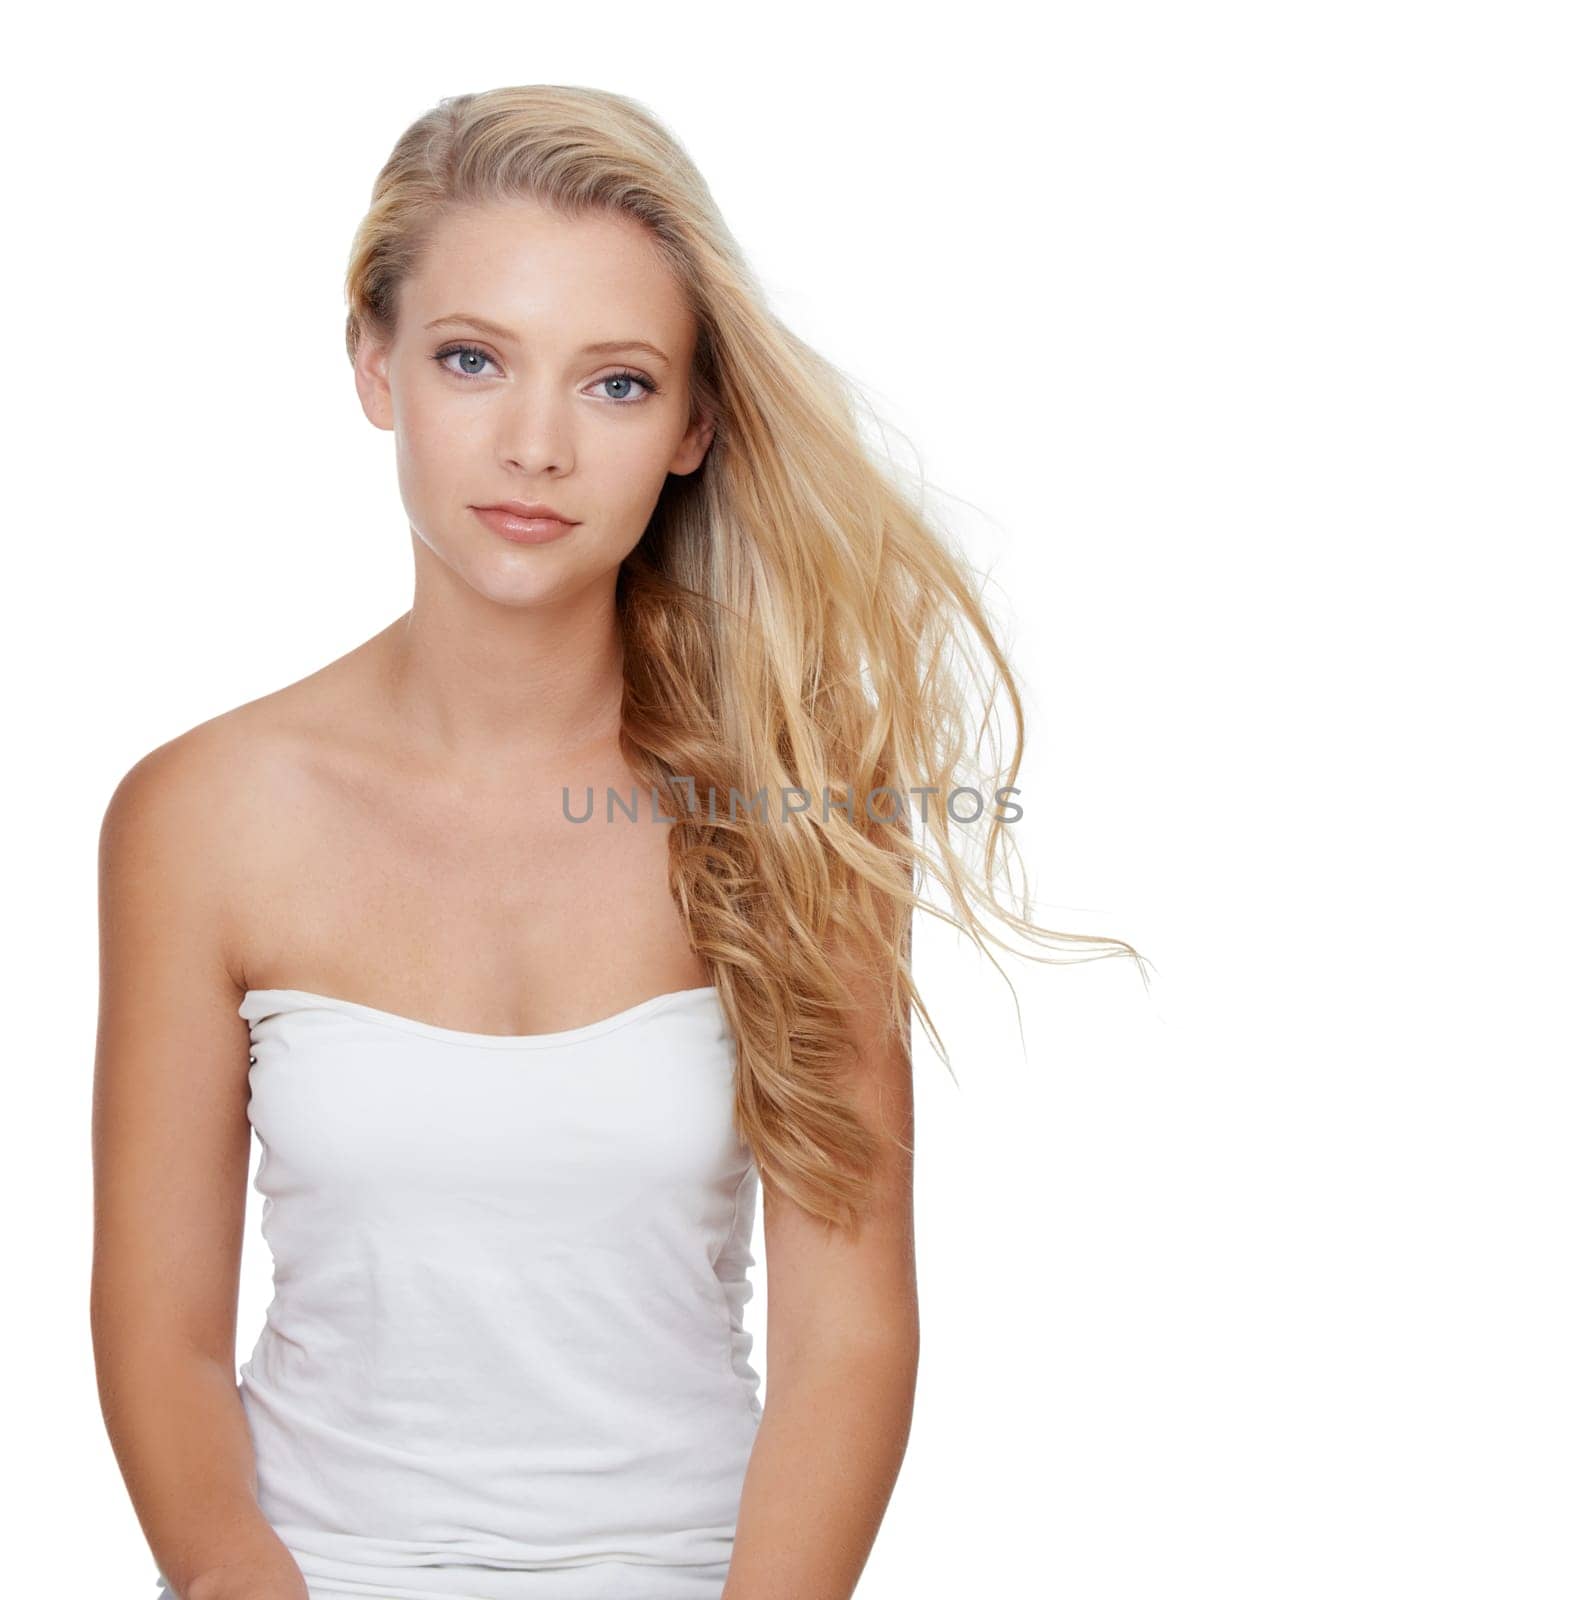 Woman, mockup and hair care with cosmetics in studio for beauty, keratin treatment and shampoo shine. Model, person and confidence with skincare, collagen texture and hairstyle on white background.